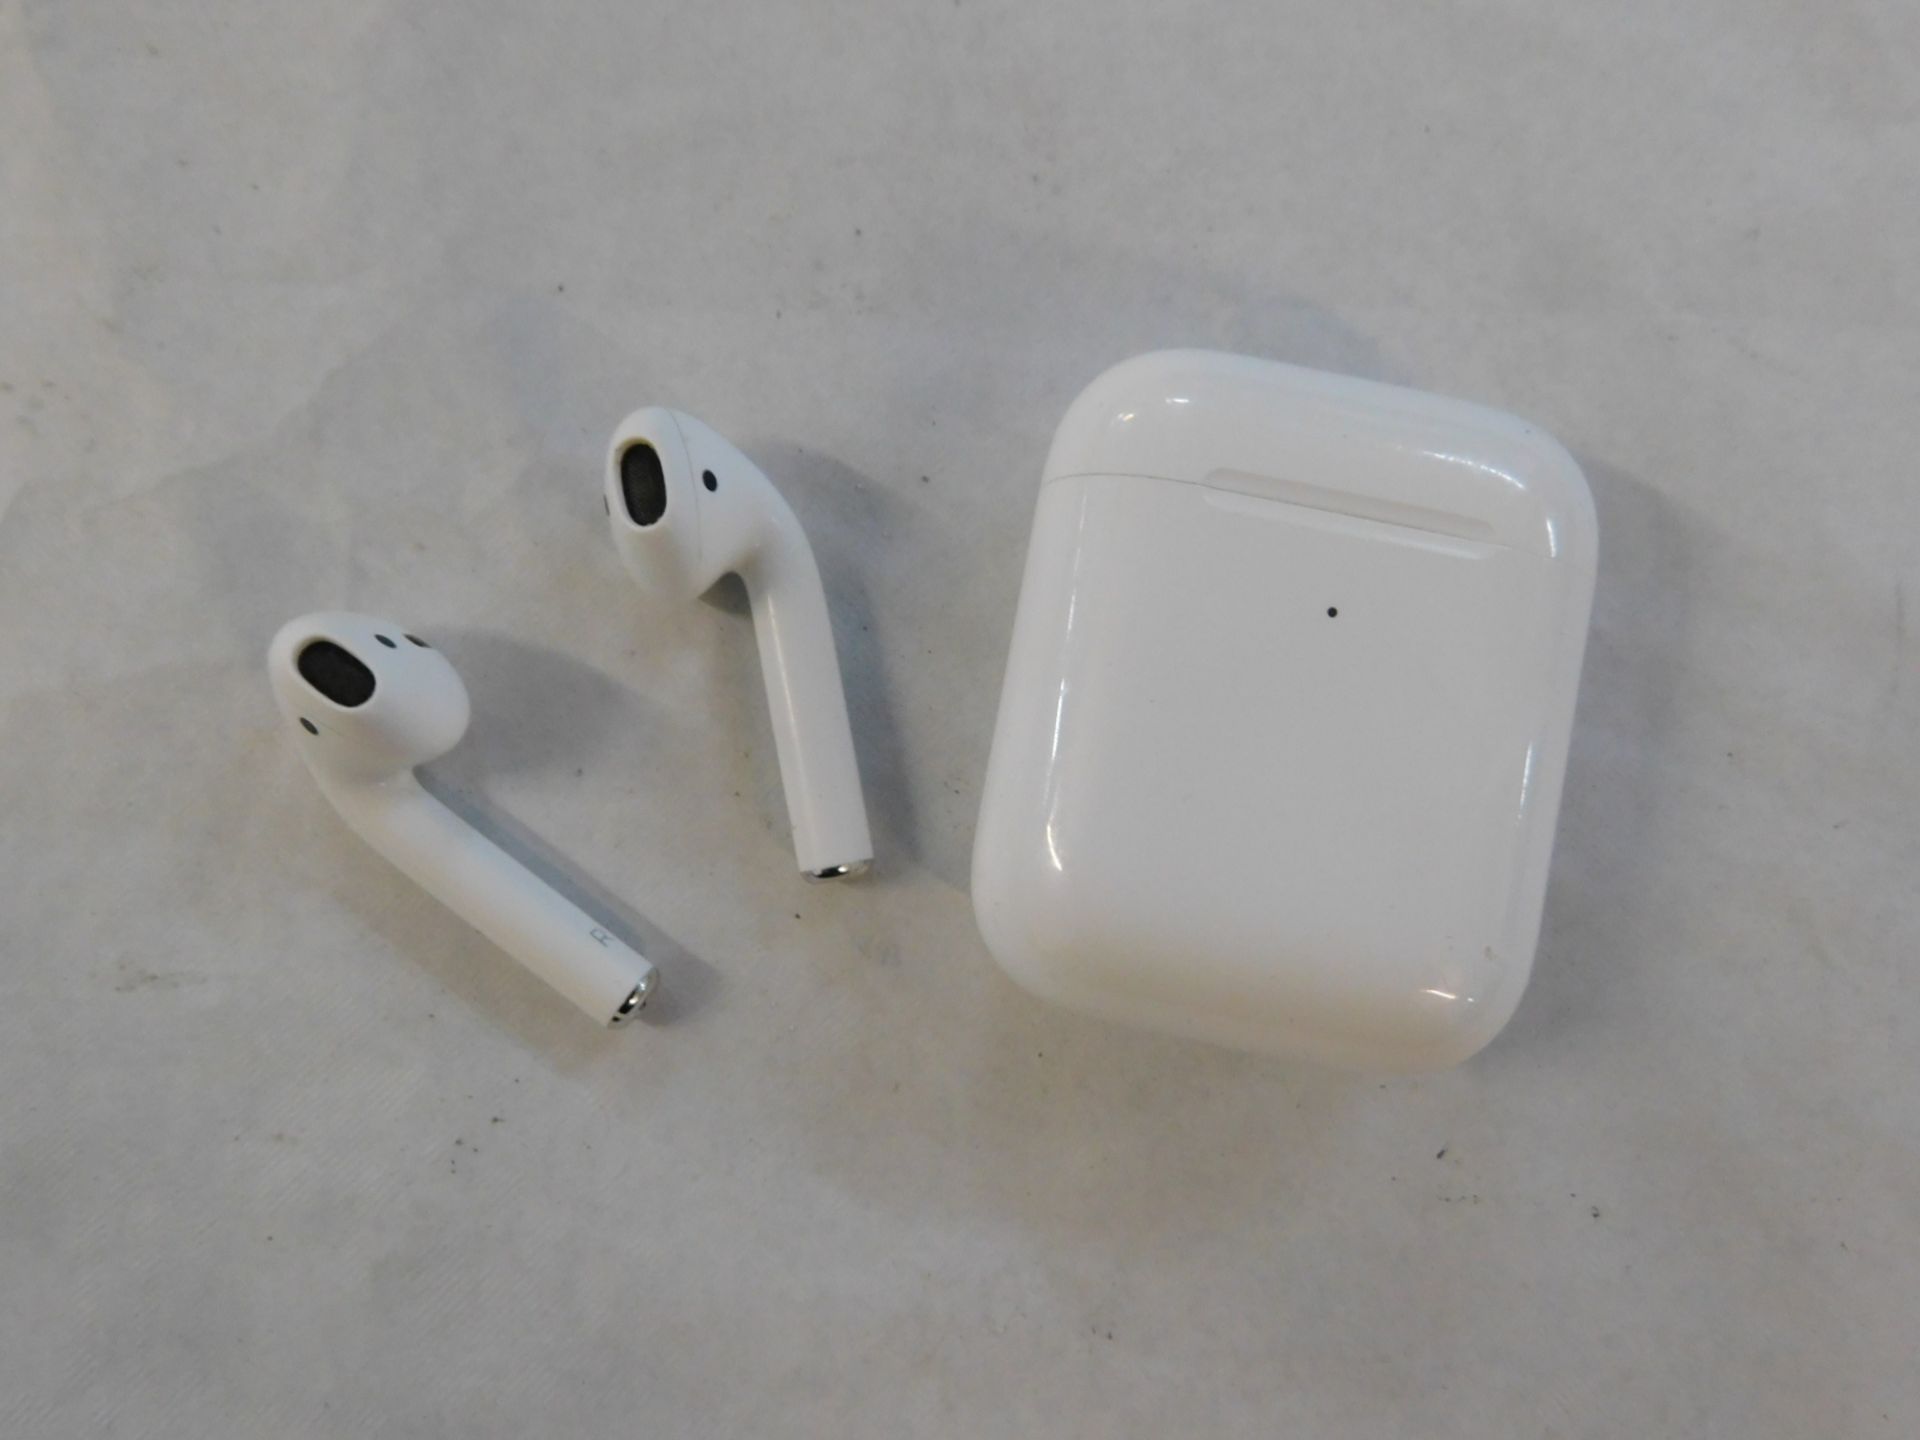 1 PAIR OF APPLE AIRPODS 2ND GENERATION BLUETOOTH EARPHONES WITH WIRLESS CHARGING CASE RRP Â£199.99